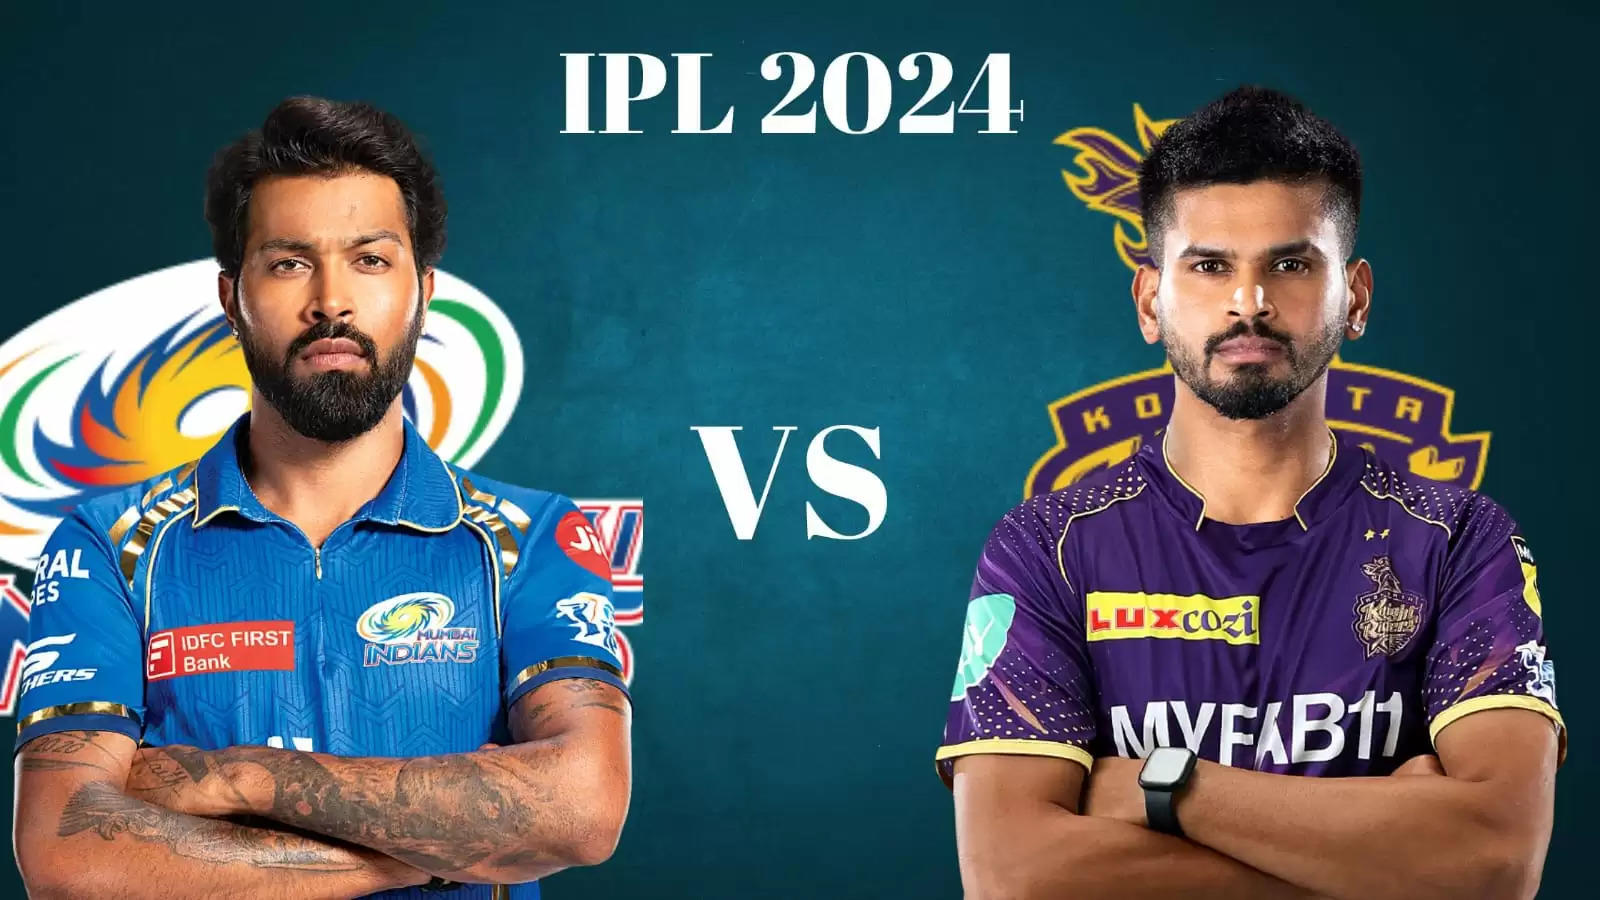 MI vs KKR Dream11 Prediction Today Match 51: Playing XI, IPL 2024 Fantasy Cricket Tips, Mumbai Indians vs Kolkata Knight Riders Dream11 Team, Weather and Pitch Report, Injury Updates and Team News